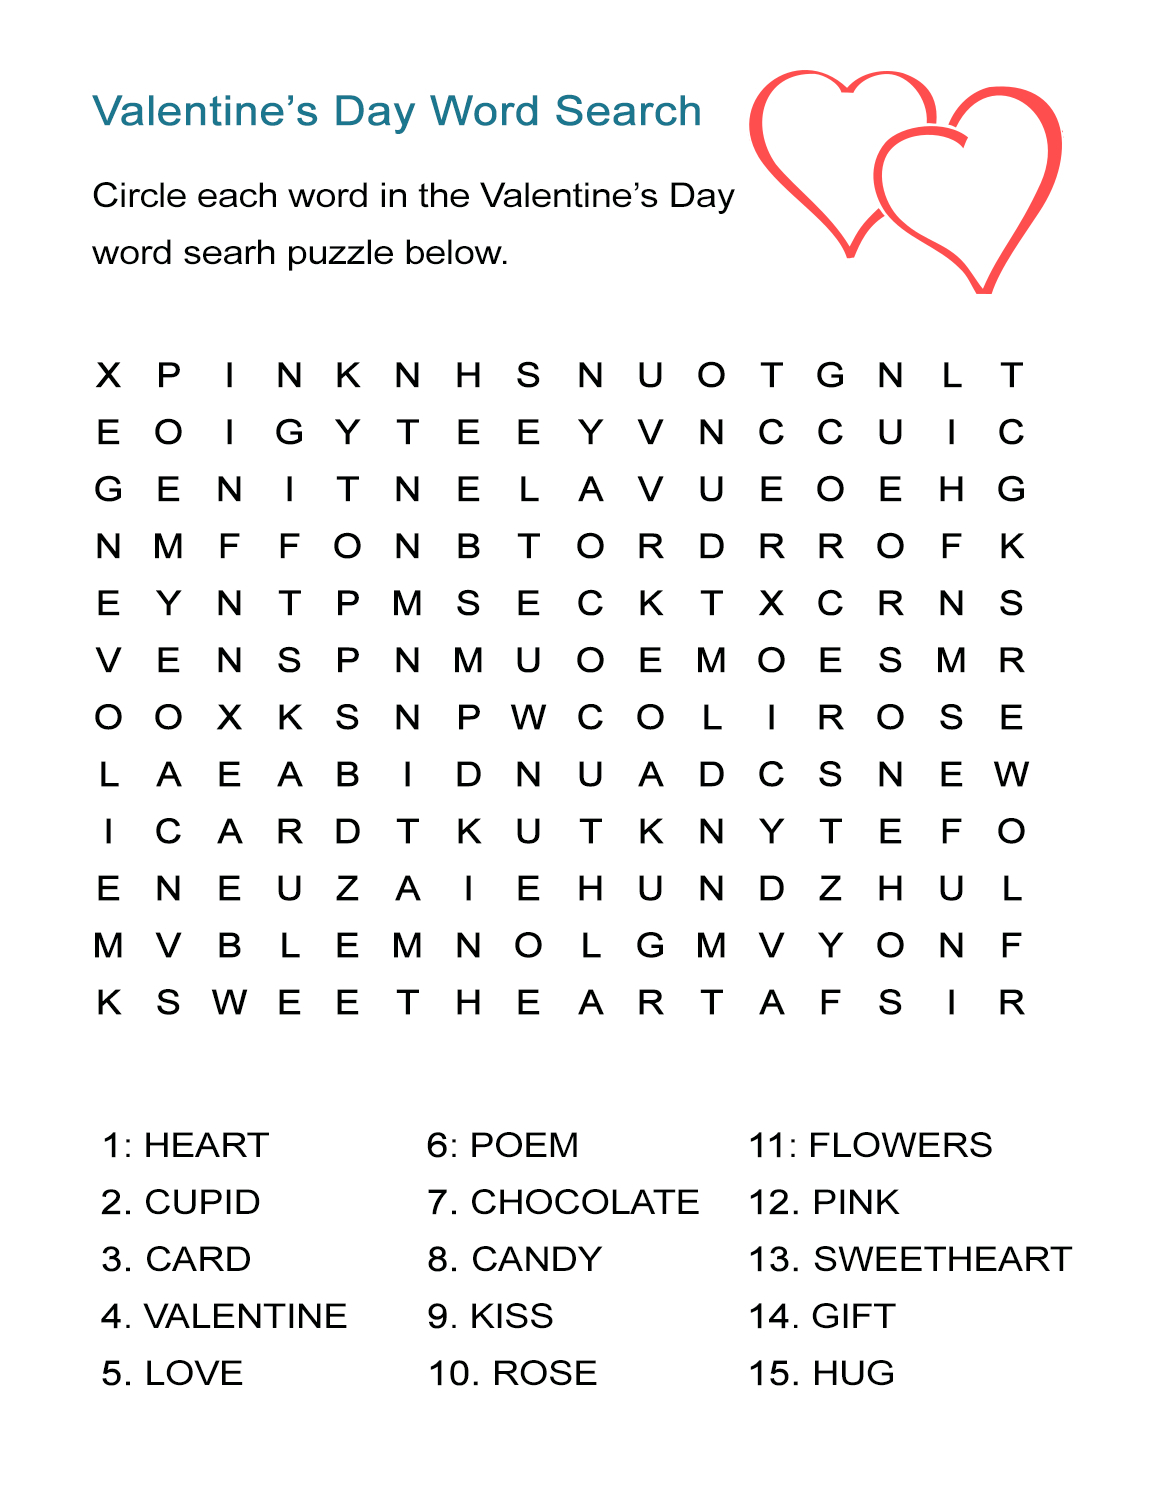 Valentine&amp;#039;s Day Word Search Puzzle: Free Worksheet For February 14 - Printable Valentine Puzzles Games